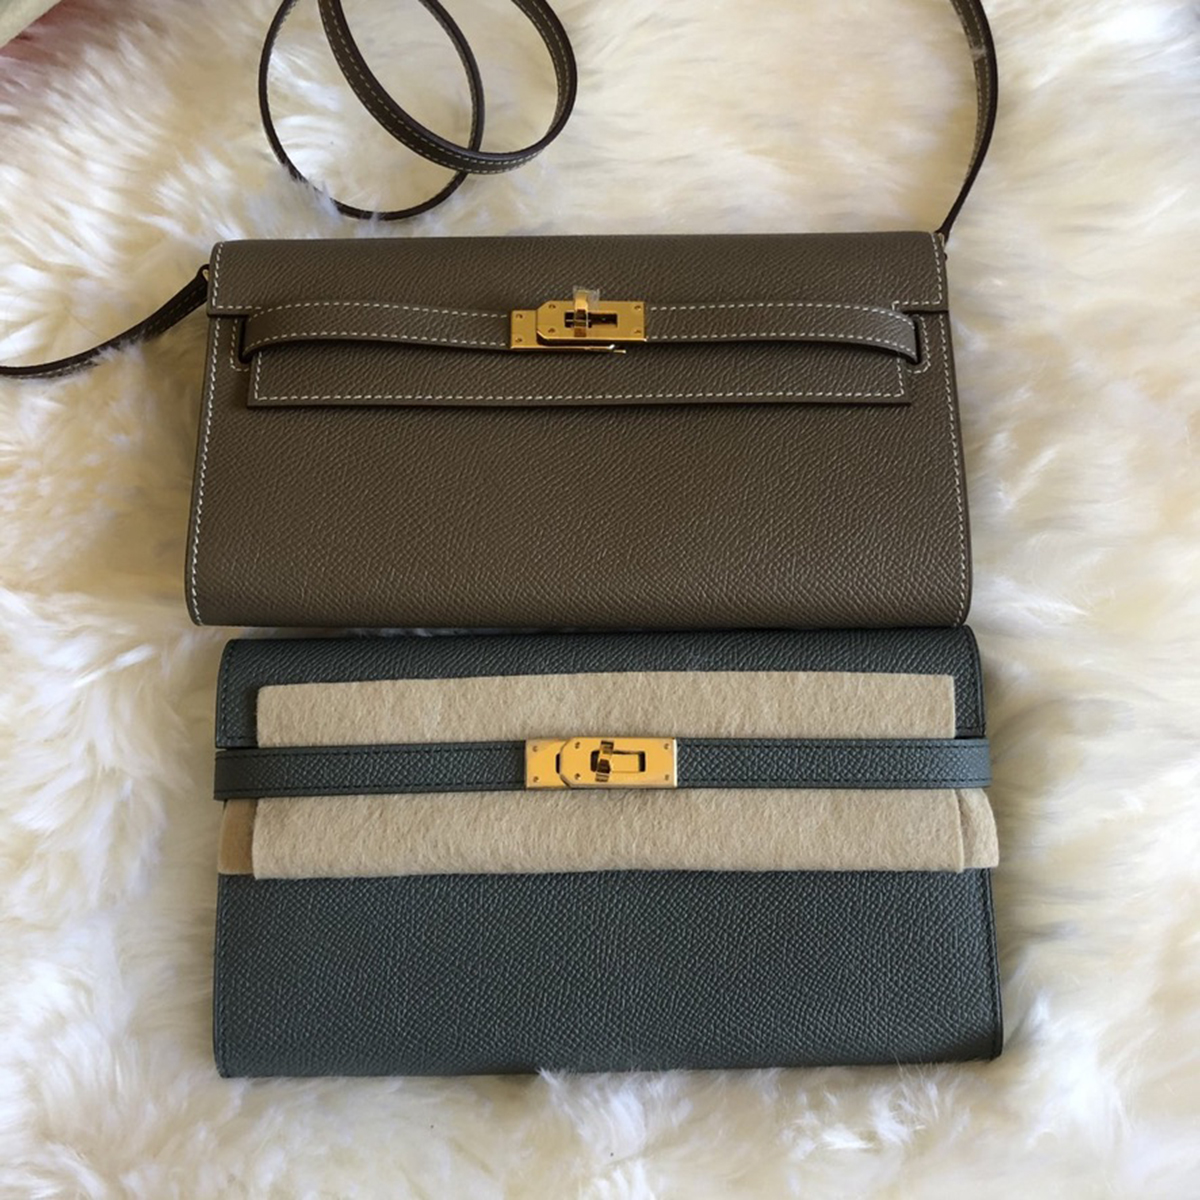 The Kelly To Go (here, in Etoupe) is slightly larger than the Kelly Wallet (Vert Amande). Photo via TPFer @momoc.